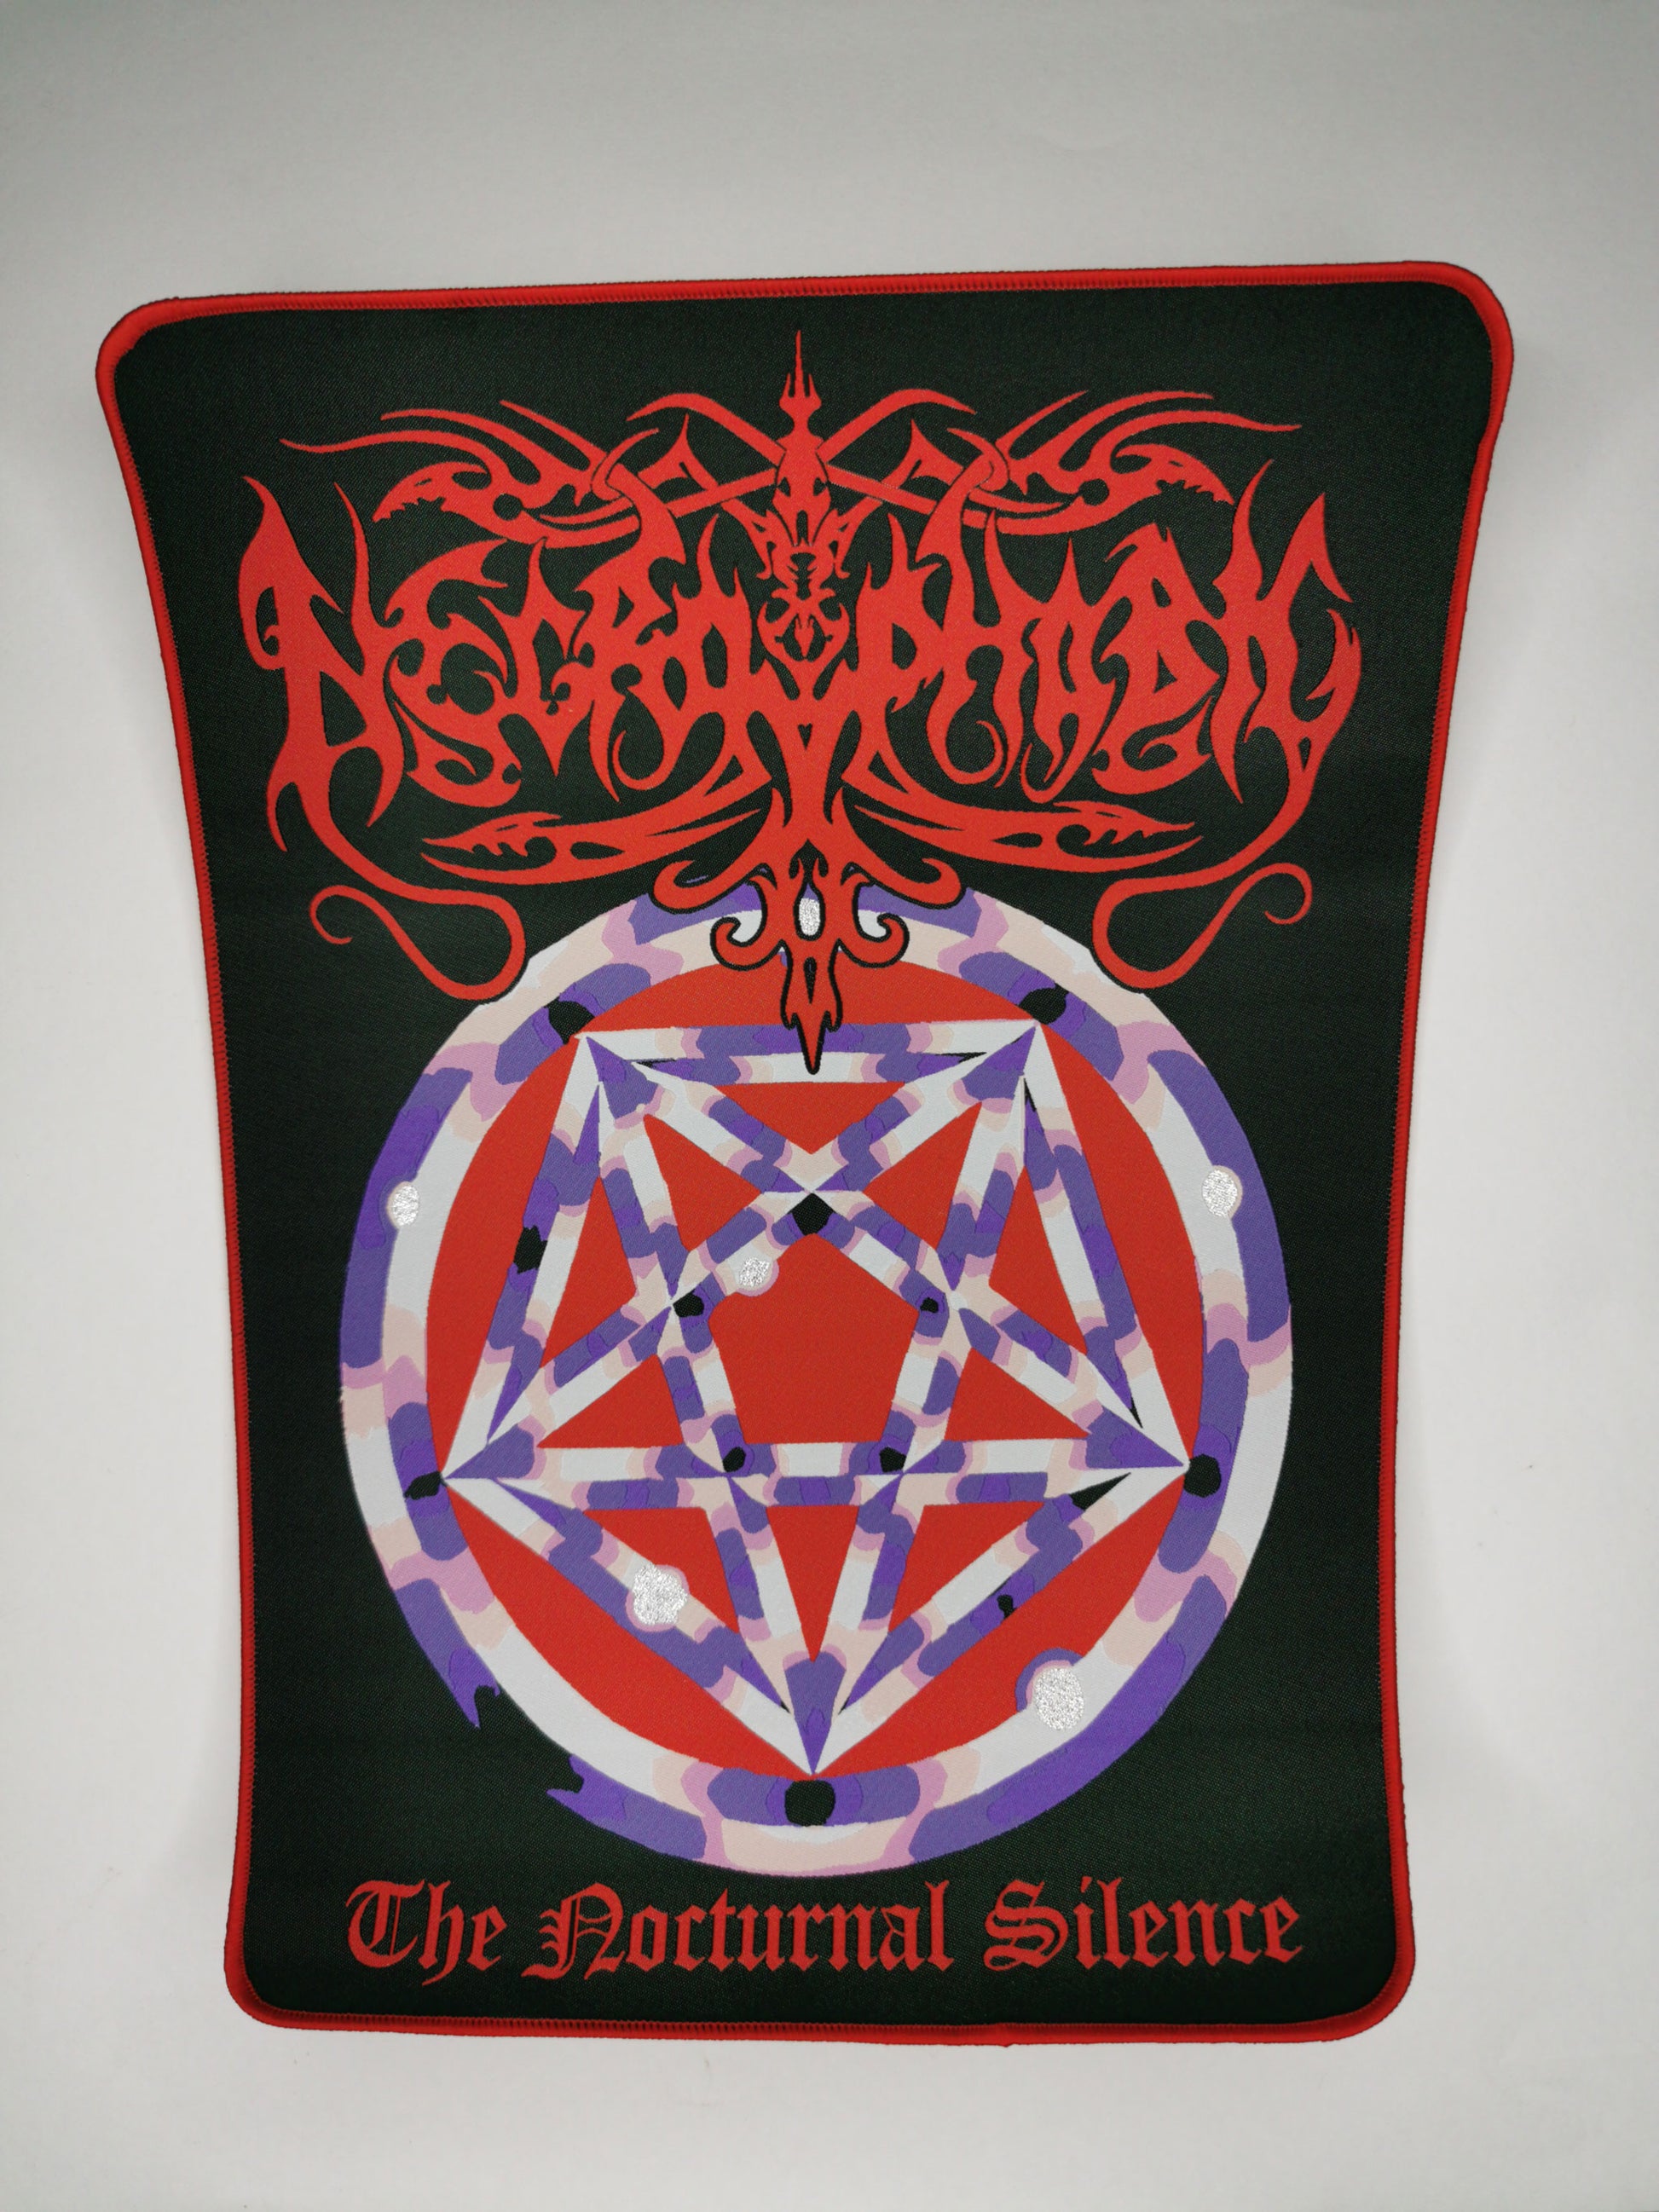 Necrophobic The Nocturnal Silence Red Border Woven Backpatch